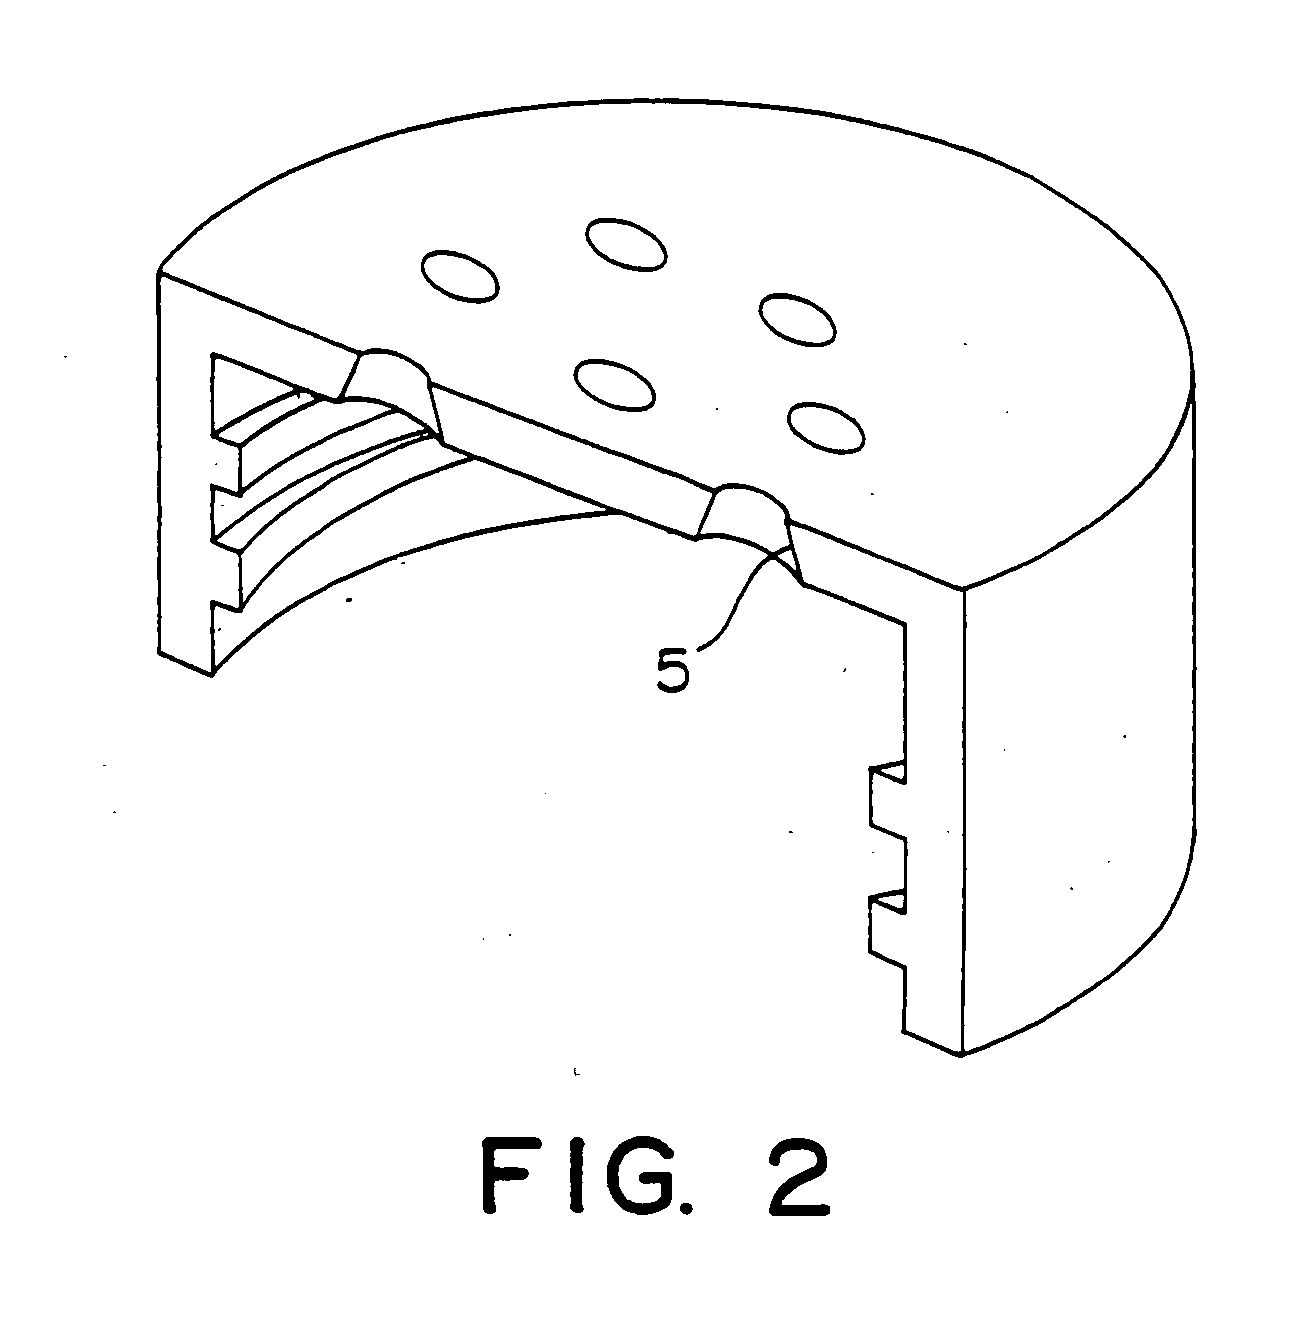 Novel wound irrigation device and method